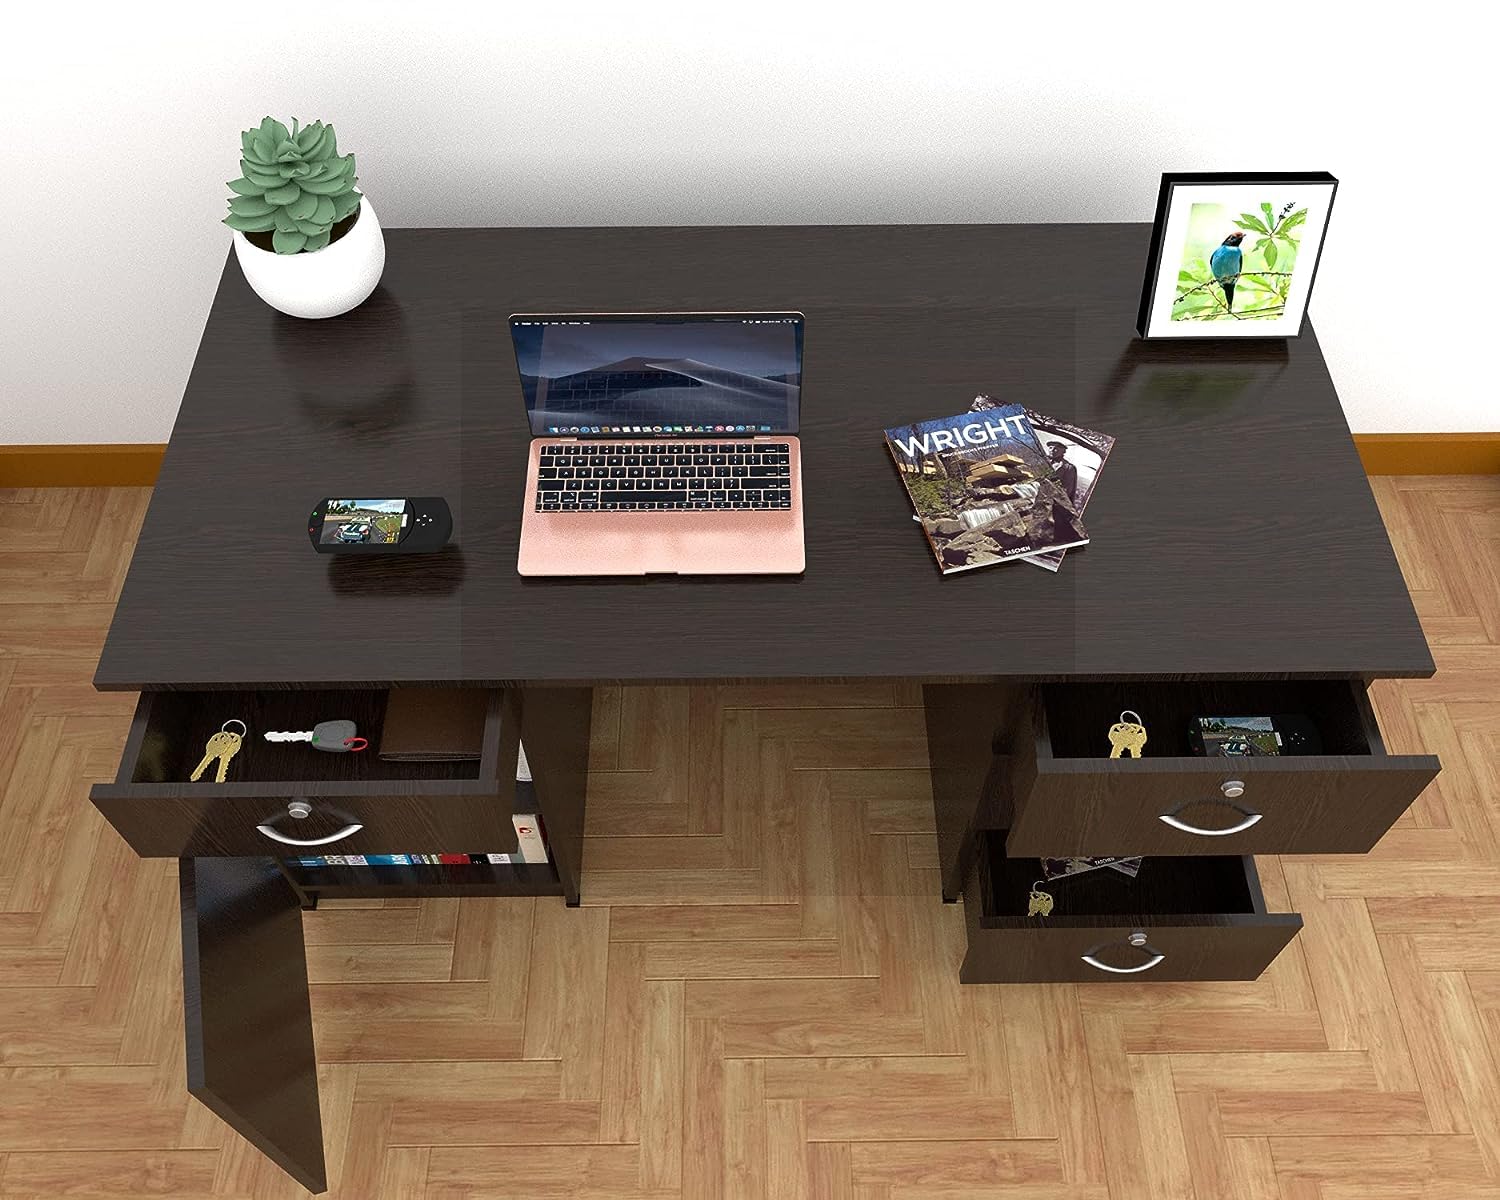 CASPIAN Furniture Office Table || Office Table || Study Table || Size in Inches (WDITH - 48, Depth 24, Height 30)